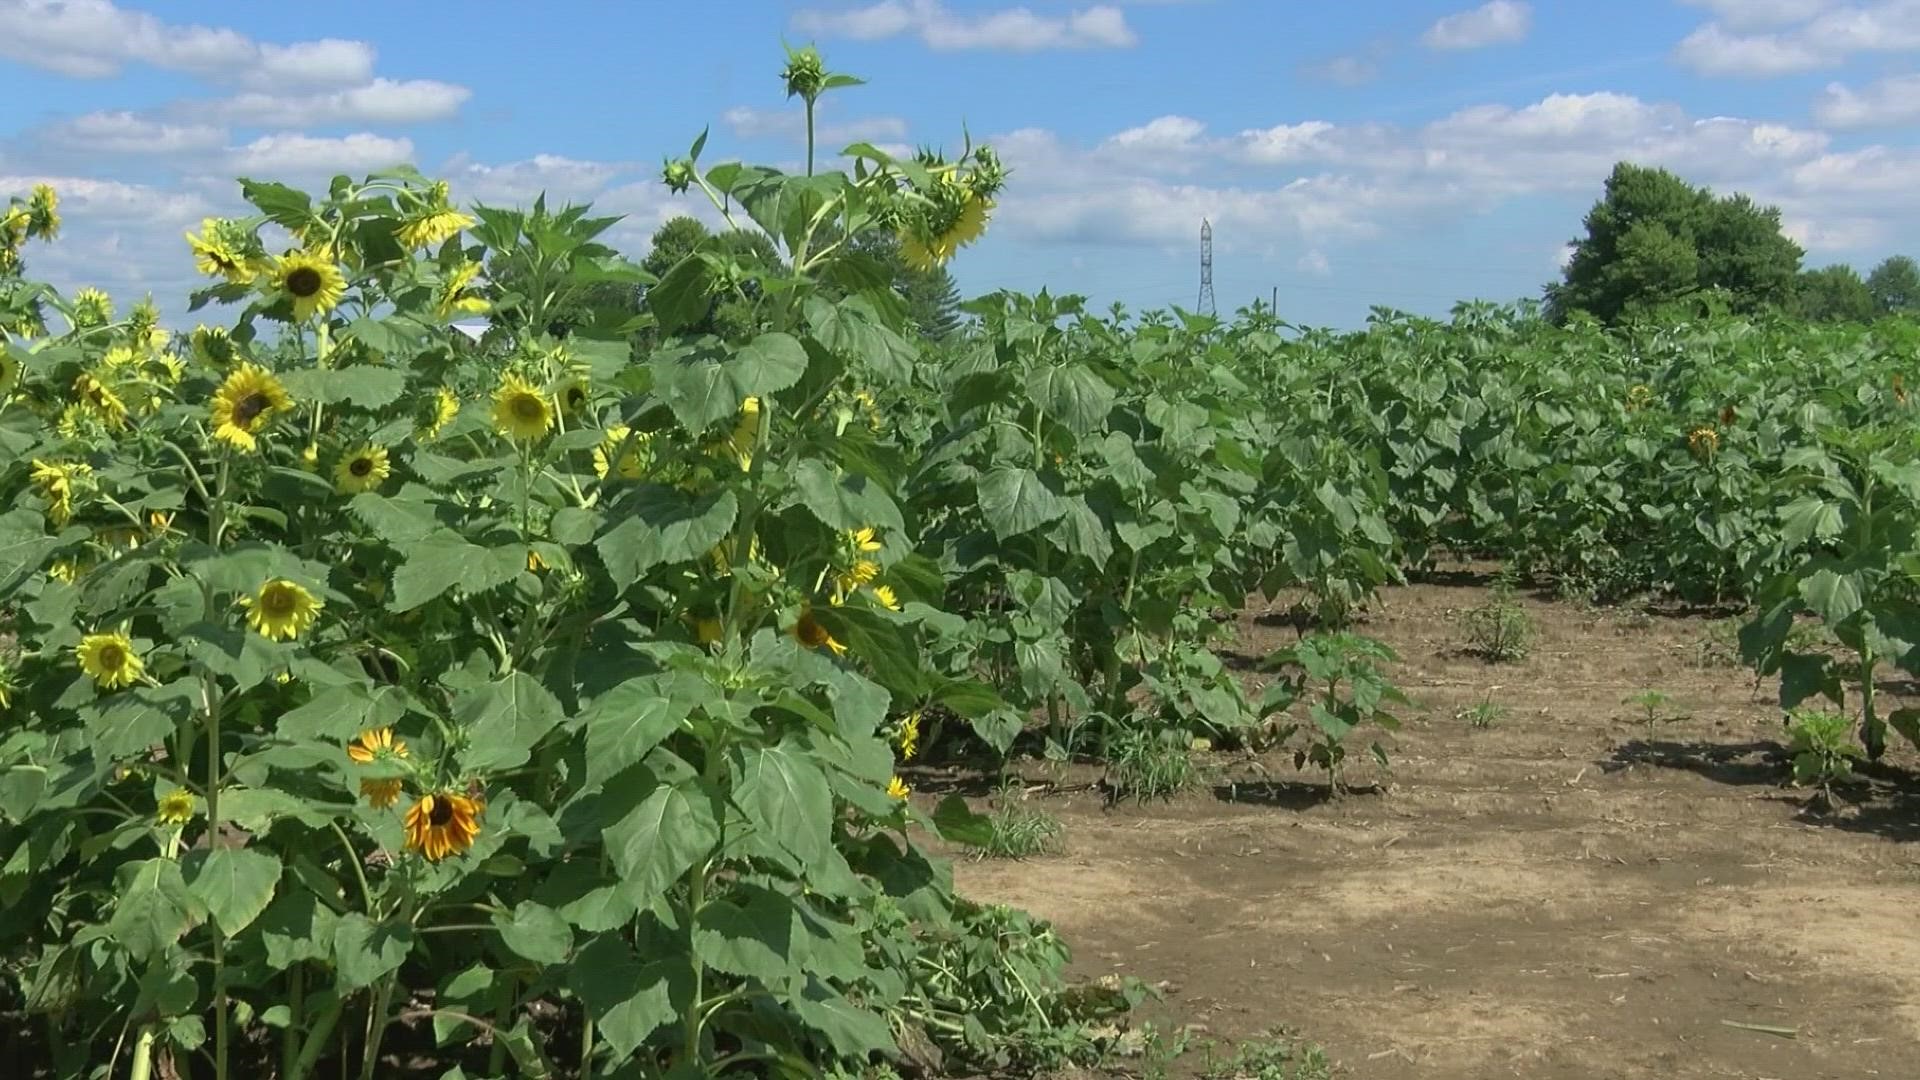 Gust Flower and Produce owner Jake Gust describes the affect of this summer's weather on his farm's crops.